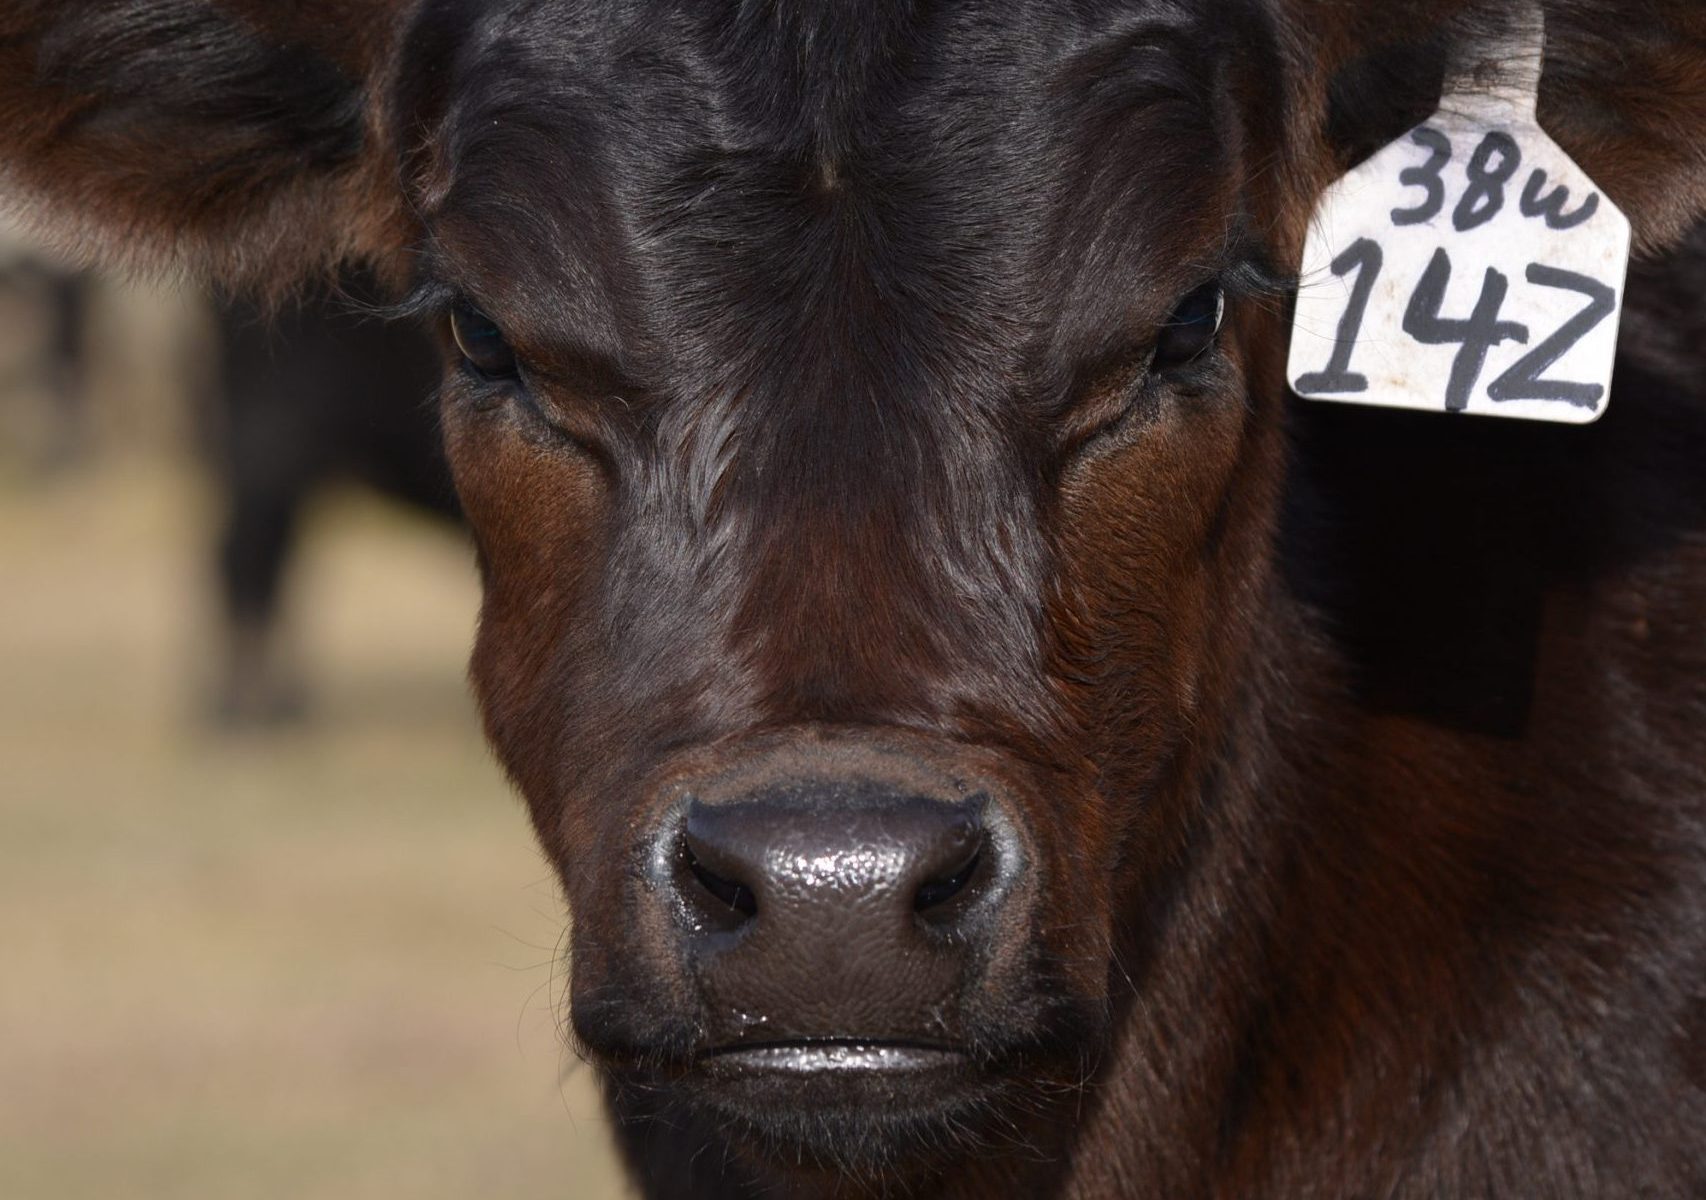 Black calf with white ear tag